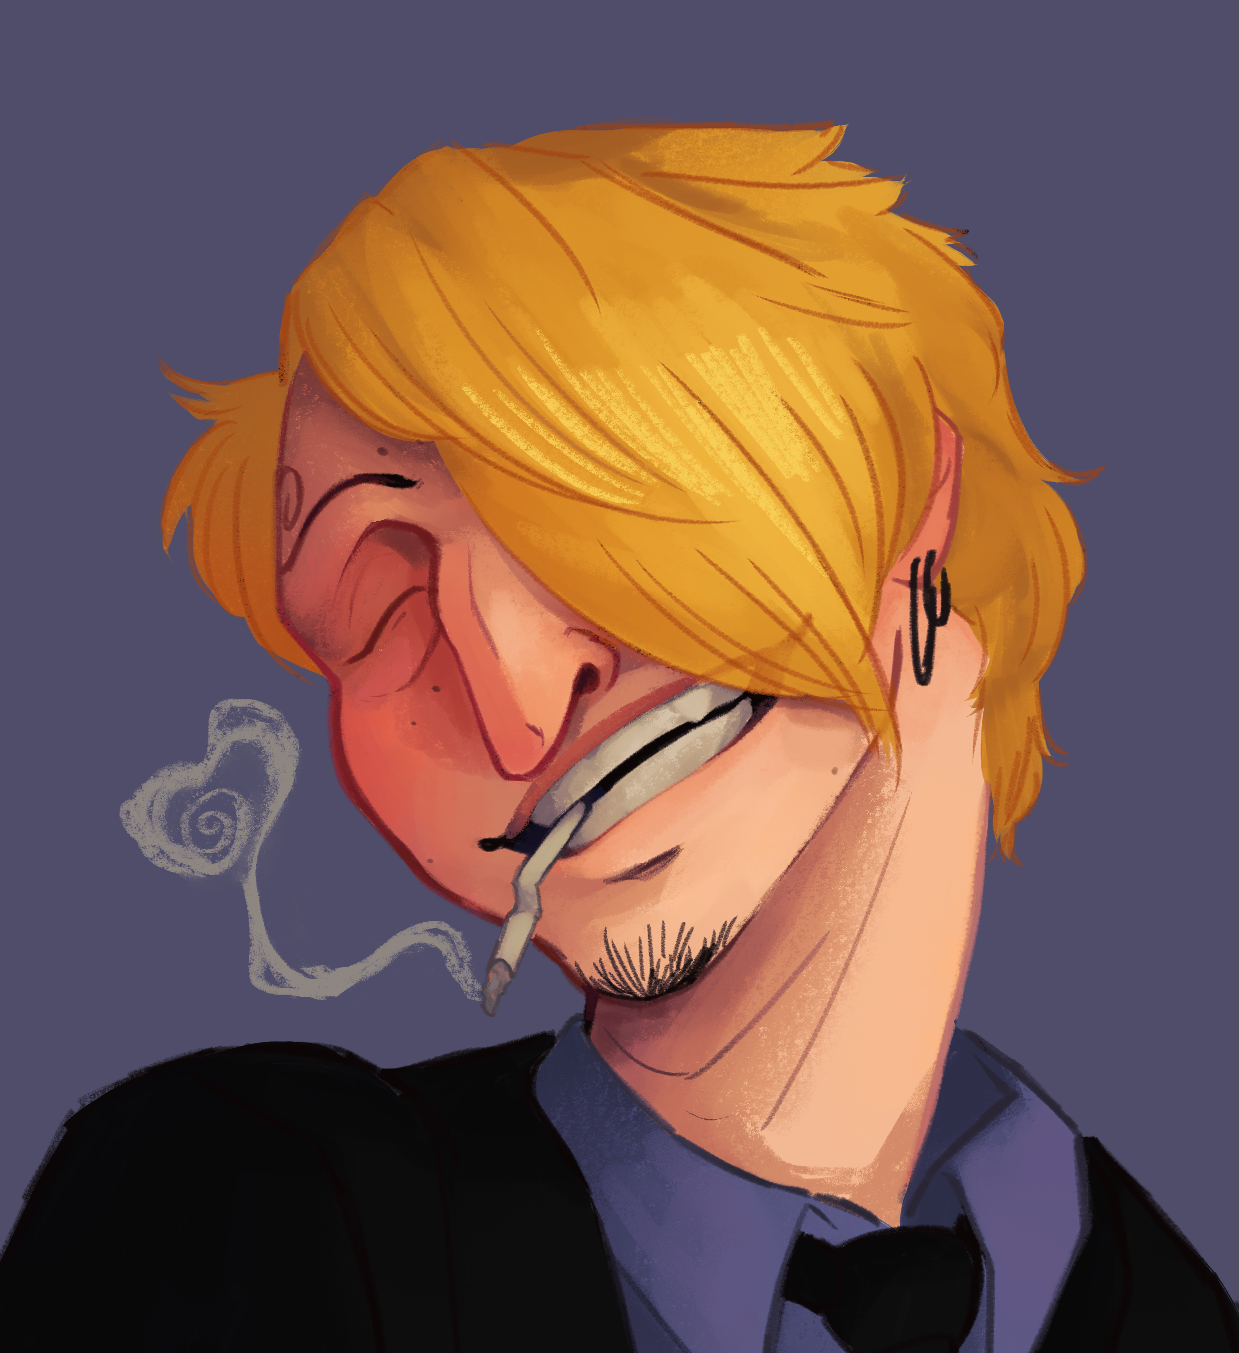 A digital portrait of Sanji from One Piece. He's grinning wide and blushing, holding a cigarette with his teeth. The smoke makes a curly little heart